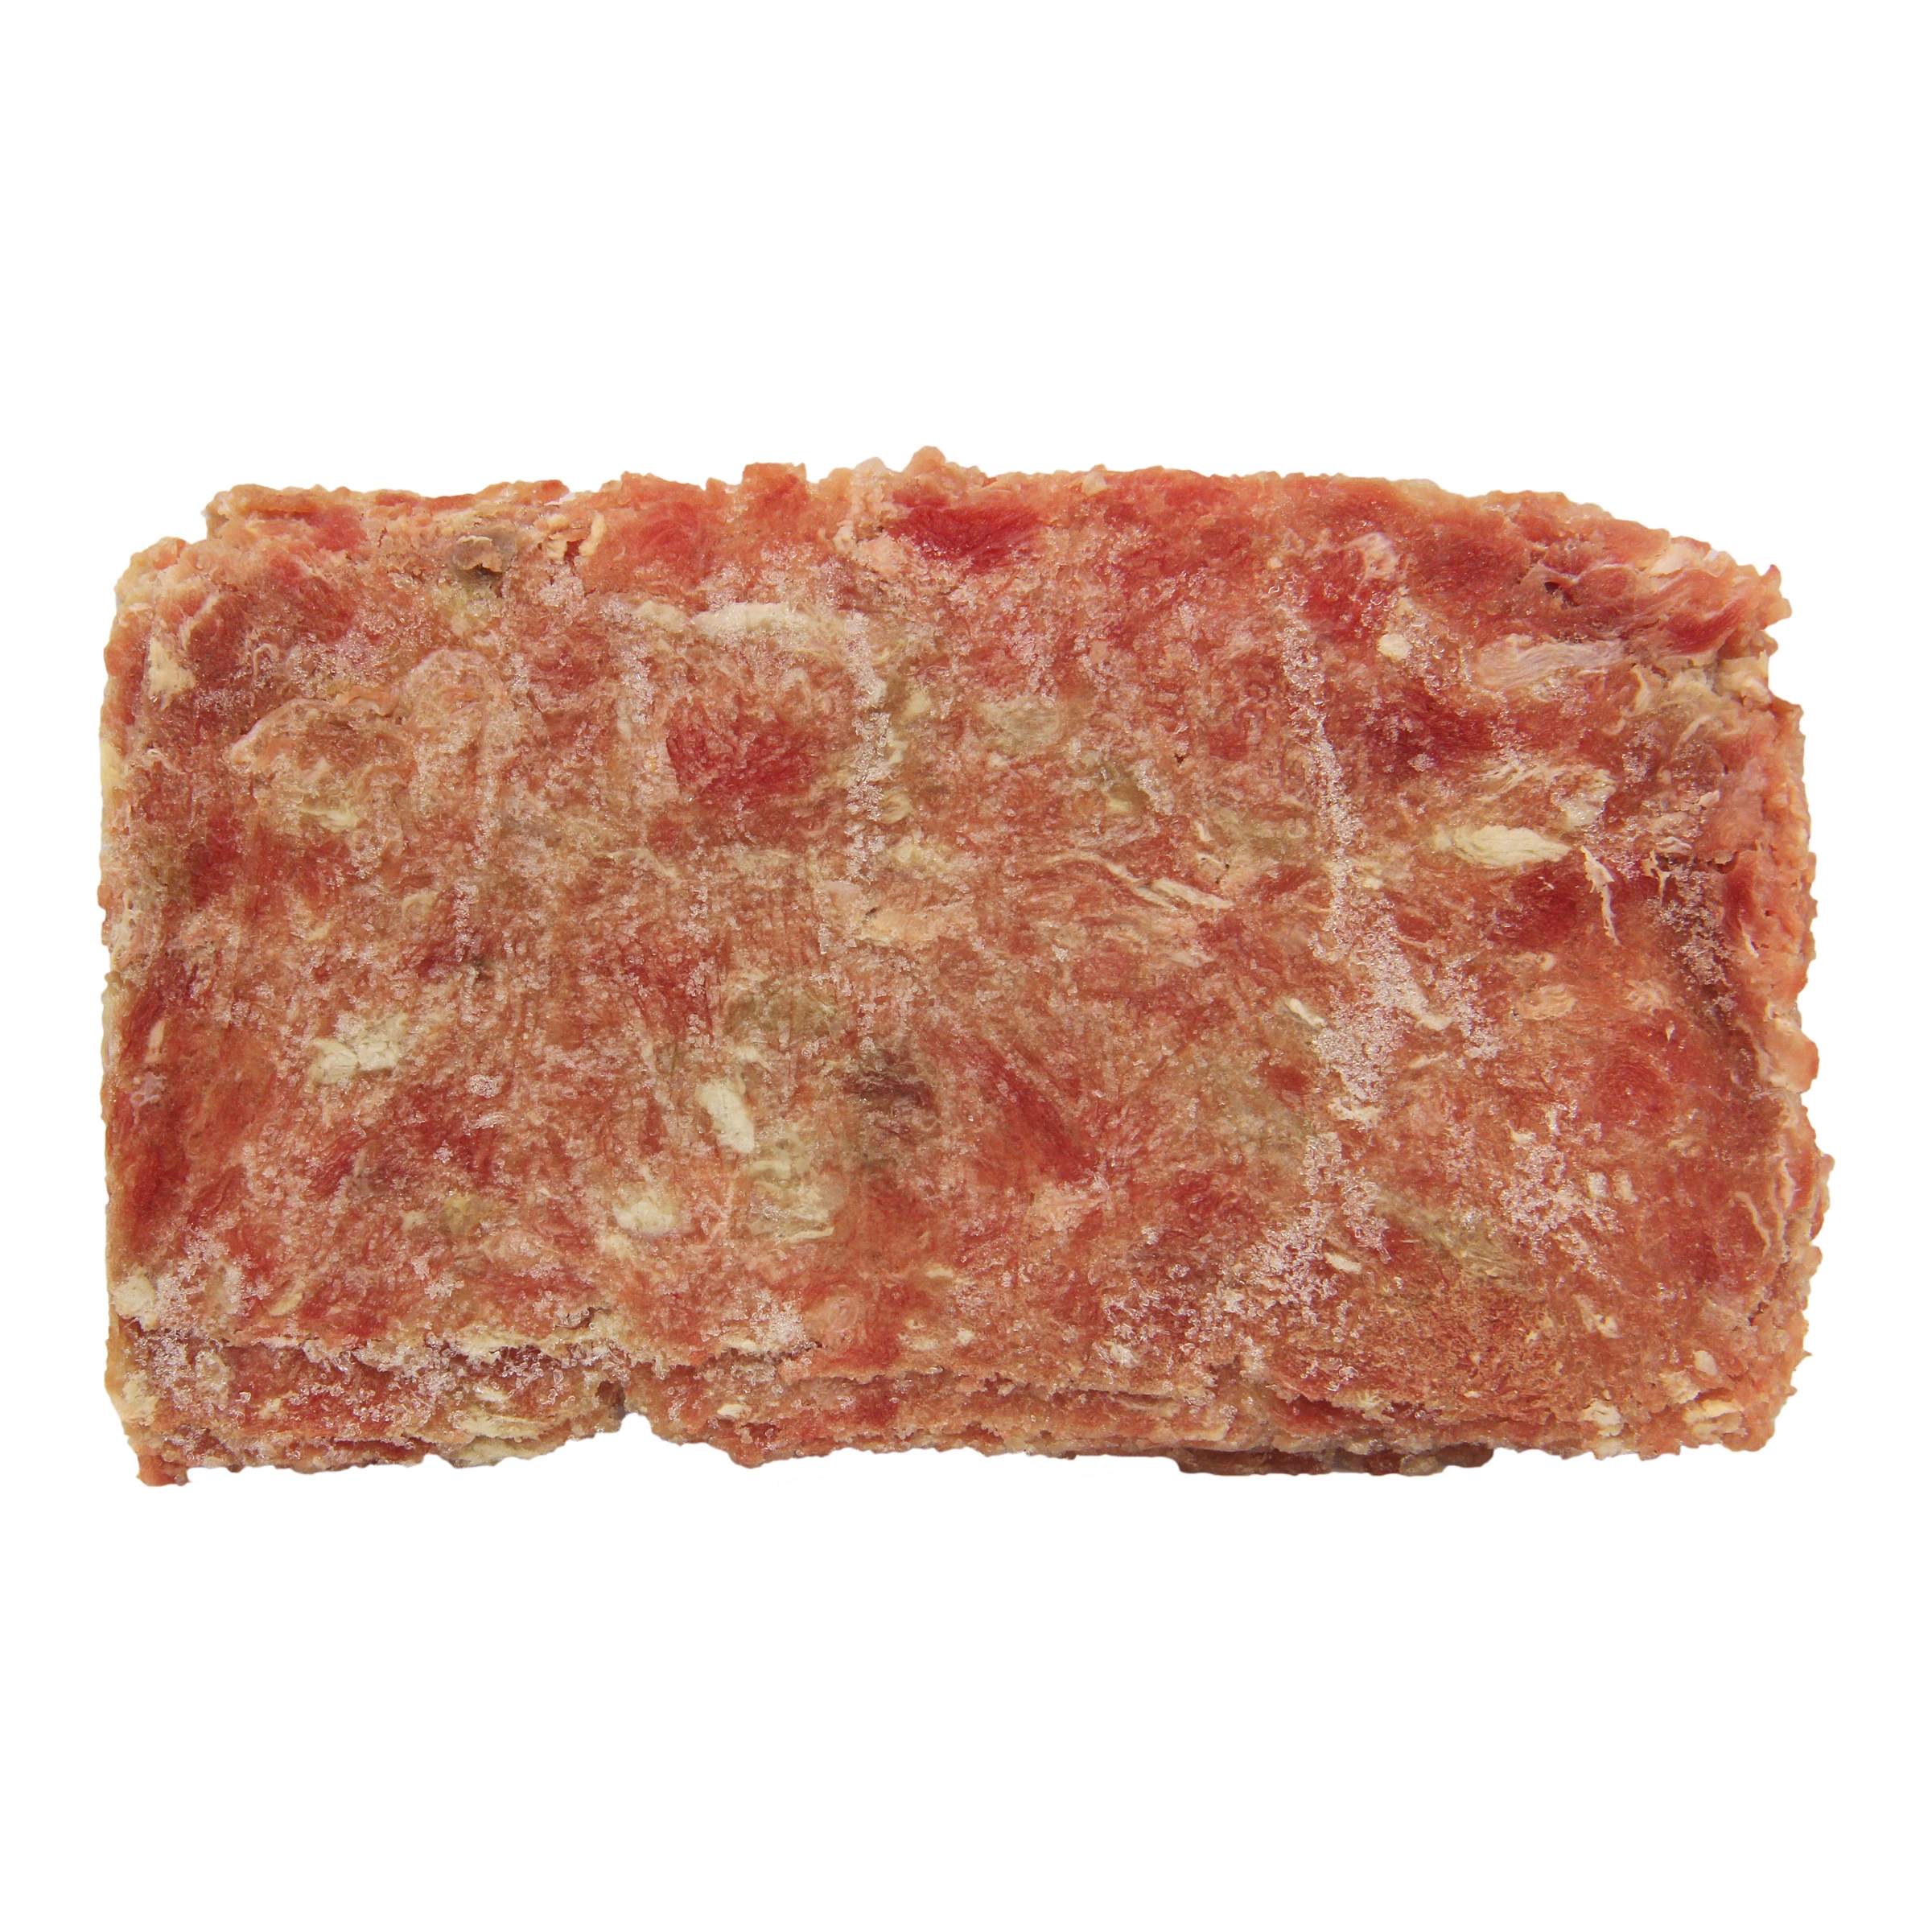 Philly Freedom® Uncooked Beef Sandwich Sliceshttp://images.salsify.com/image/upload/s--BLMCEuiG--/nf2h7esdrk7adby3uwnw.webp